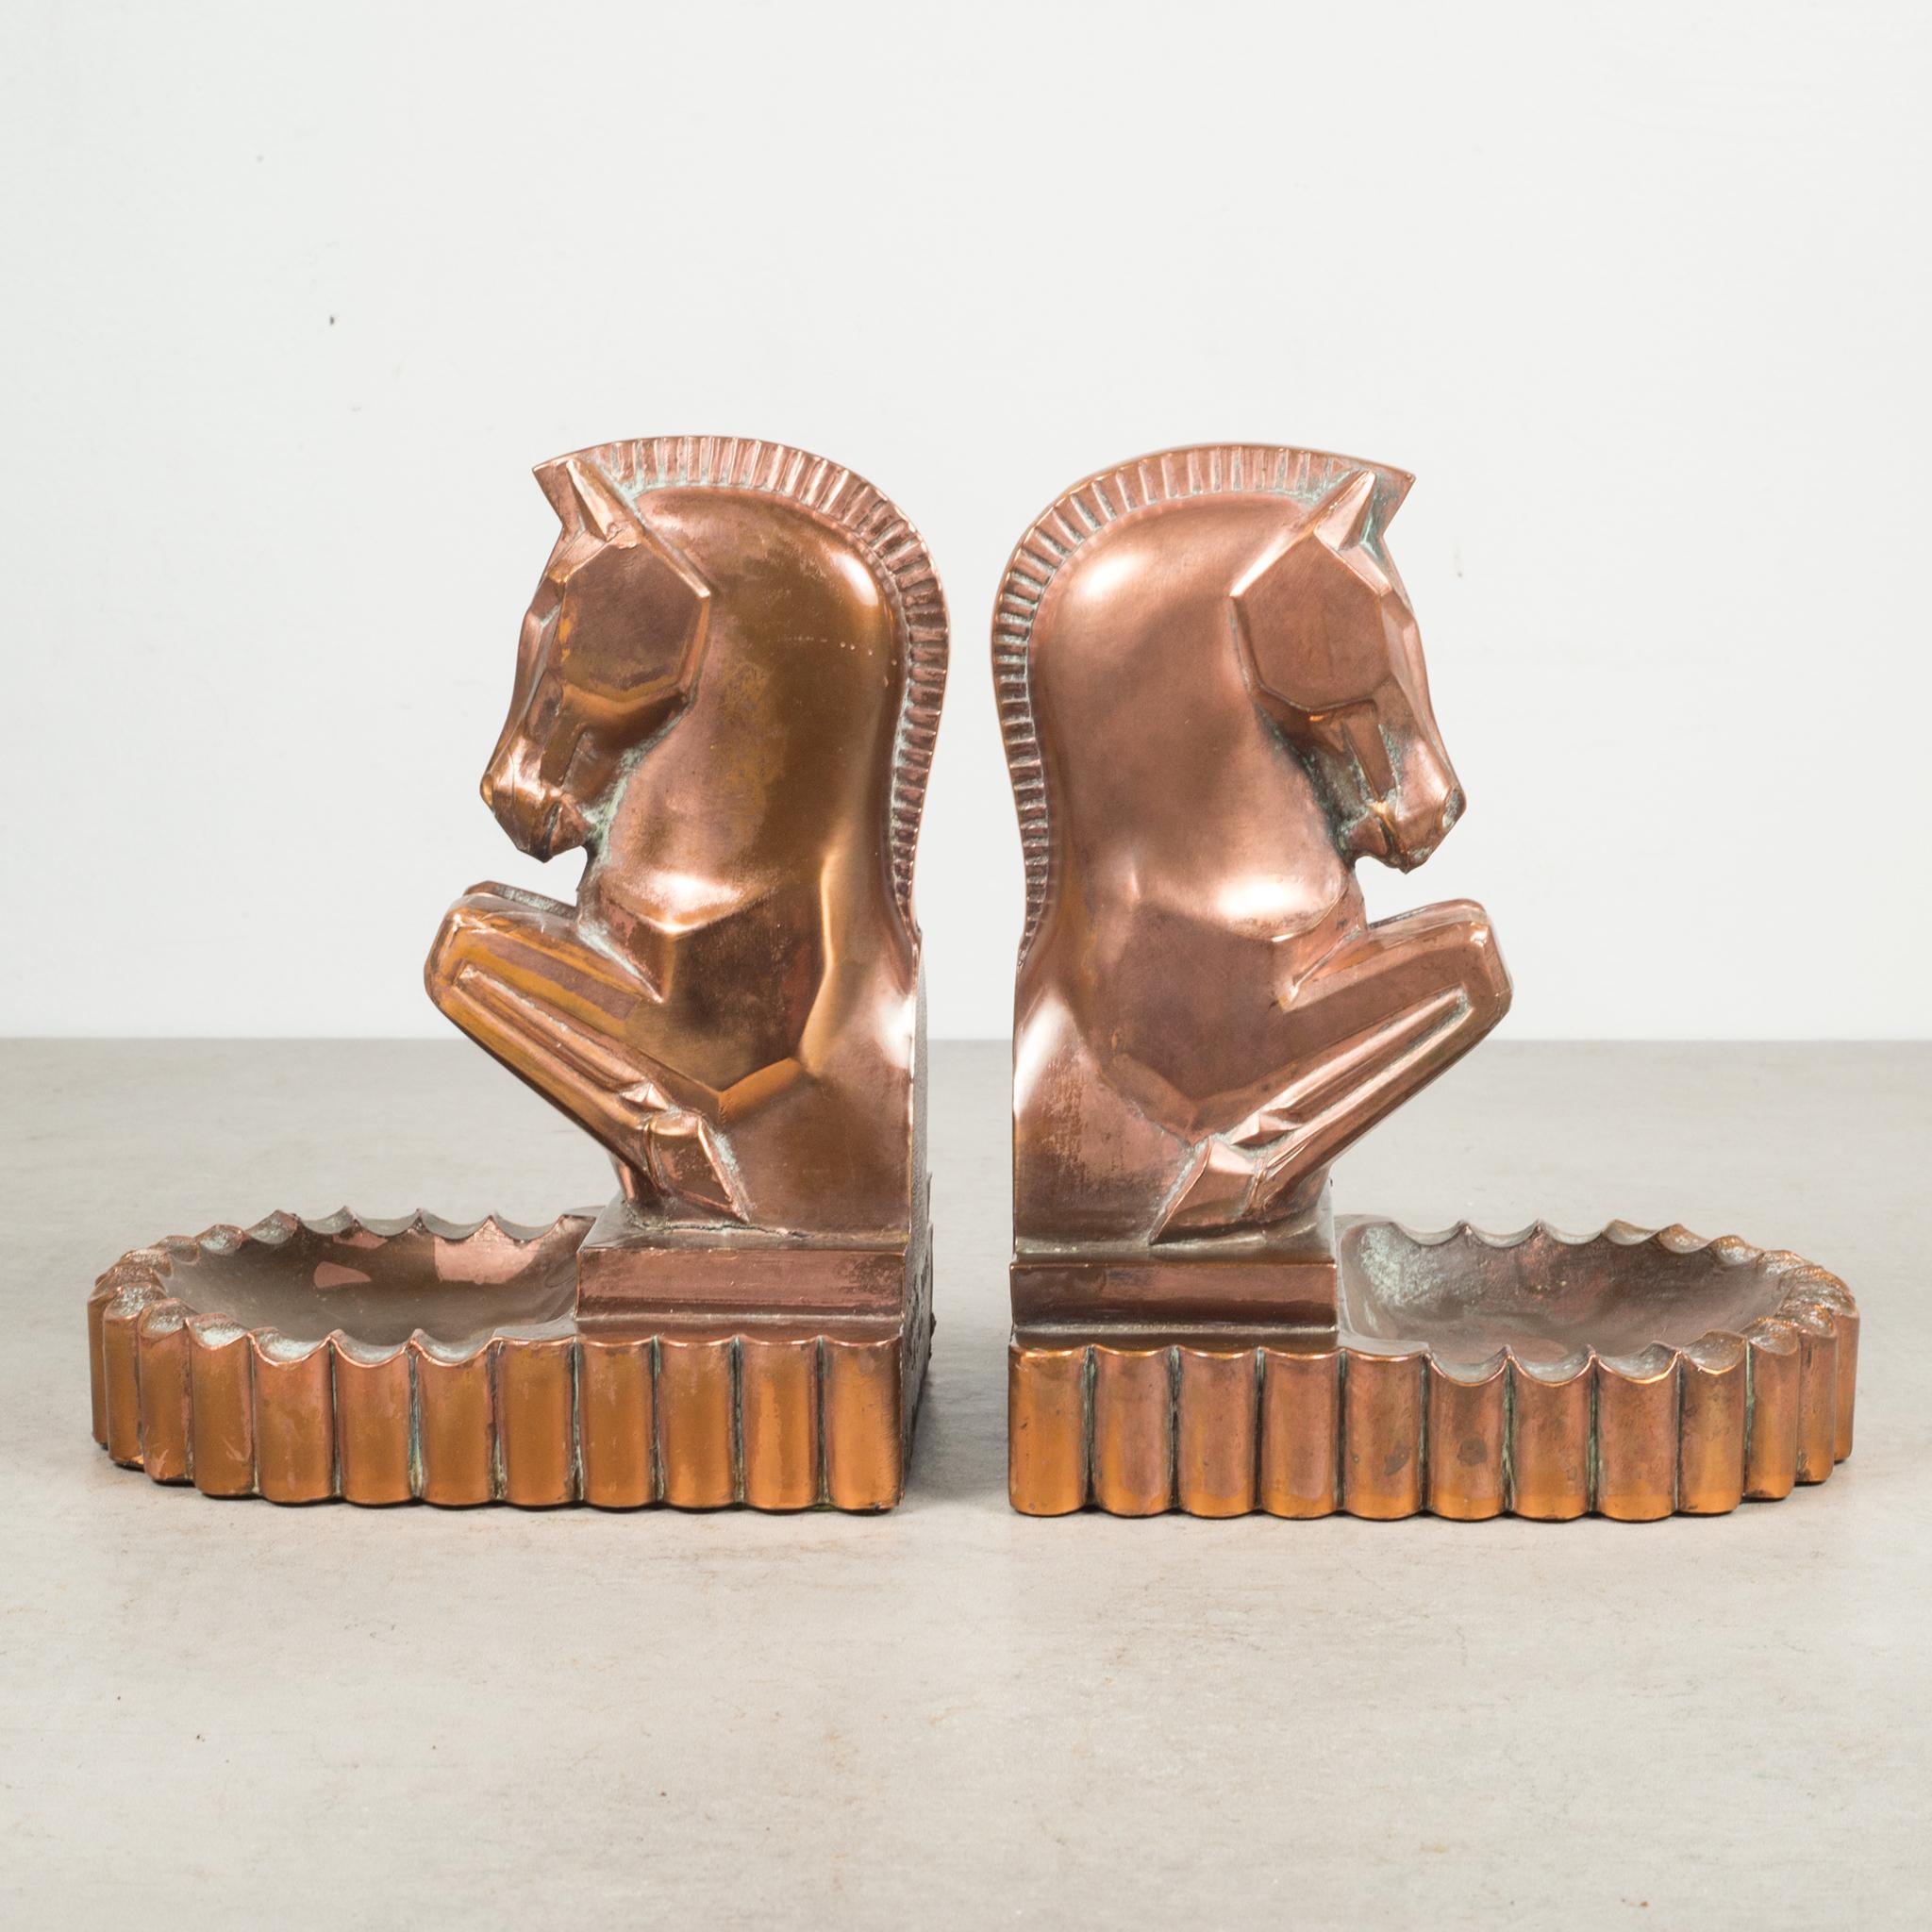 20th Century Art Deco Bronze/Copper-Plated Trojan Horse Bookends by Champion Products c.1930